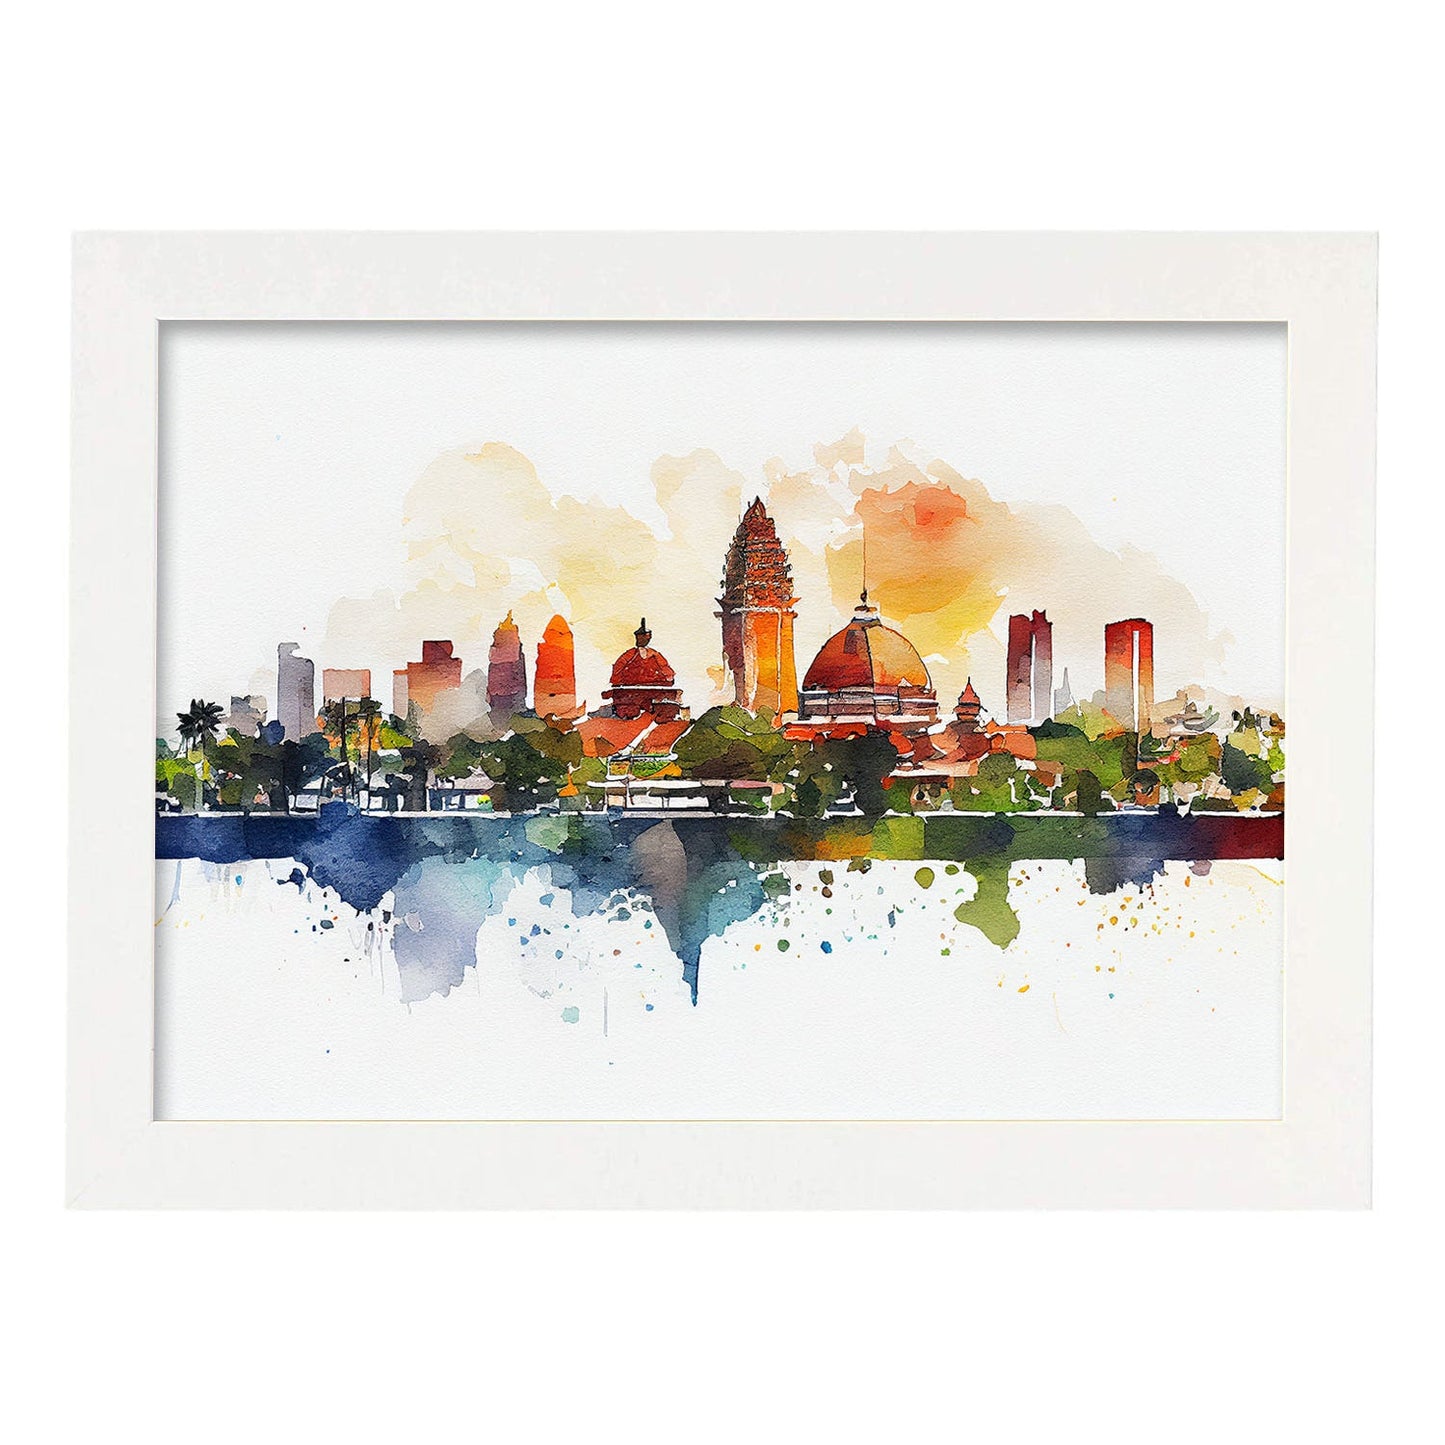 Nacnic watercolor of a skyline of the city of Bali_2. Aesthetic Wall Art Prints for Bedroom or Living Room Design.-Artwork-Nacnic-A4-Marco Blanco-Nacnic Estudio SL